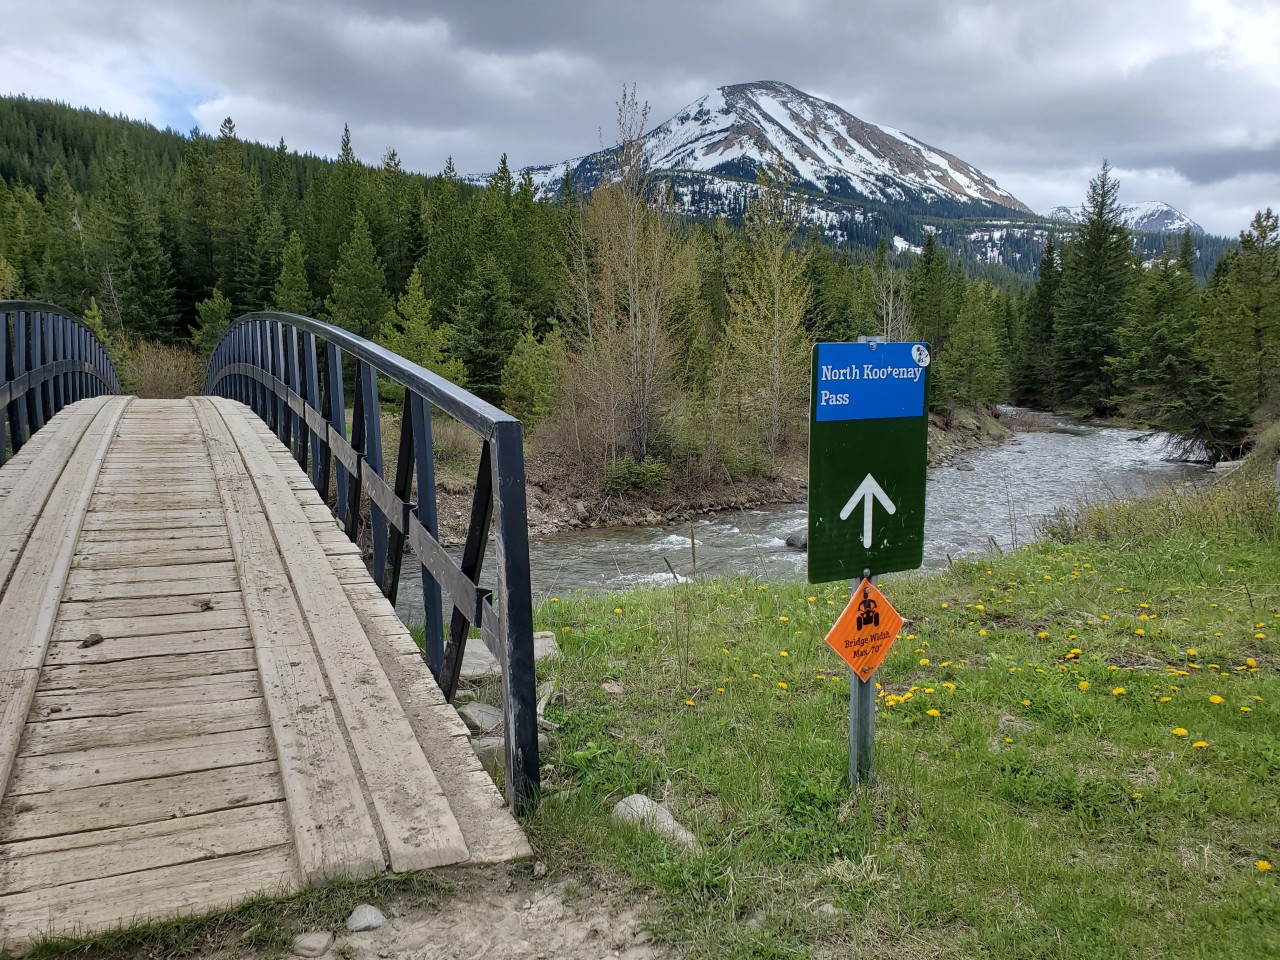 Start of the North Kootenay Pass Trail  - Right off the bat you start the North Kootenay Pass trail with a bridge crossing and mountain views.